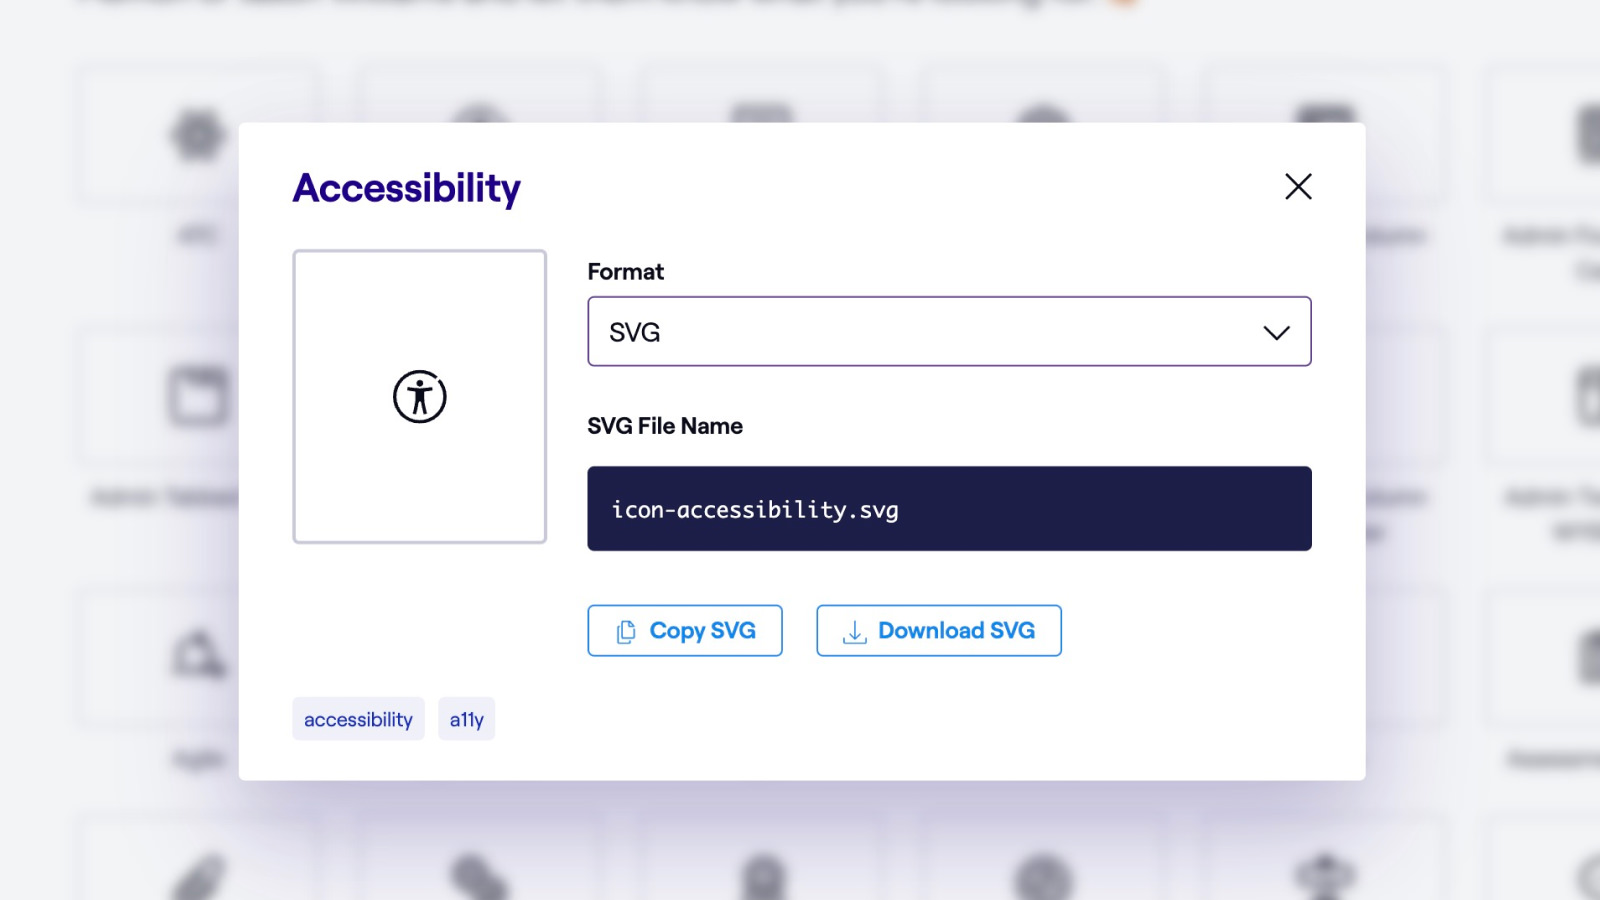 Screen shot of the Blue Steel icon library with the Accessibility icon selected and the format set to SVG.